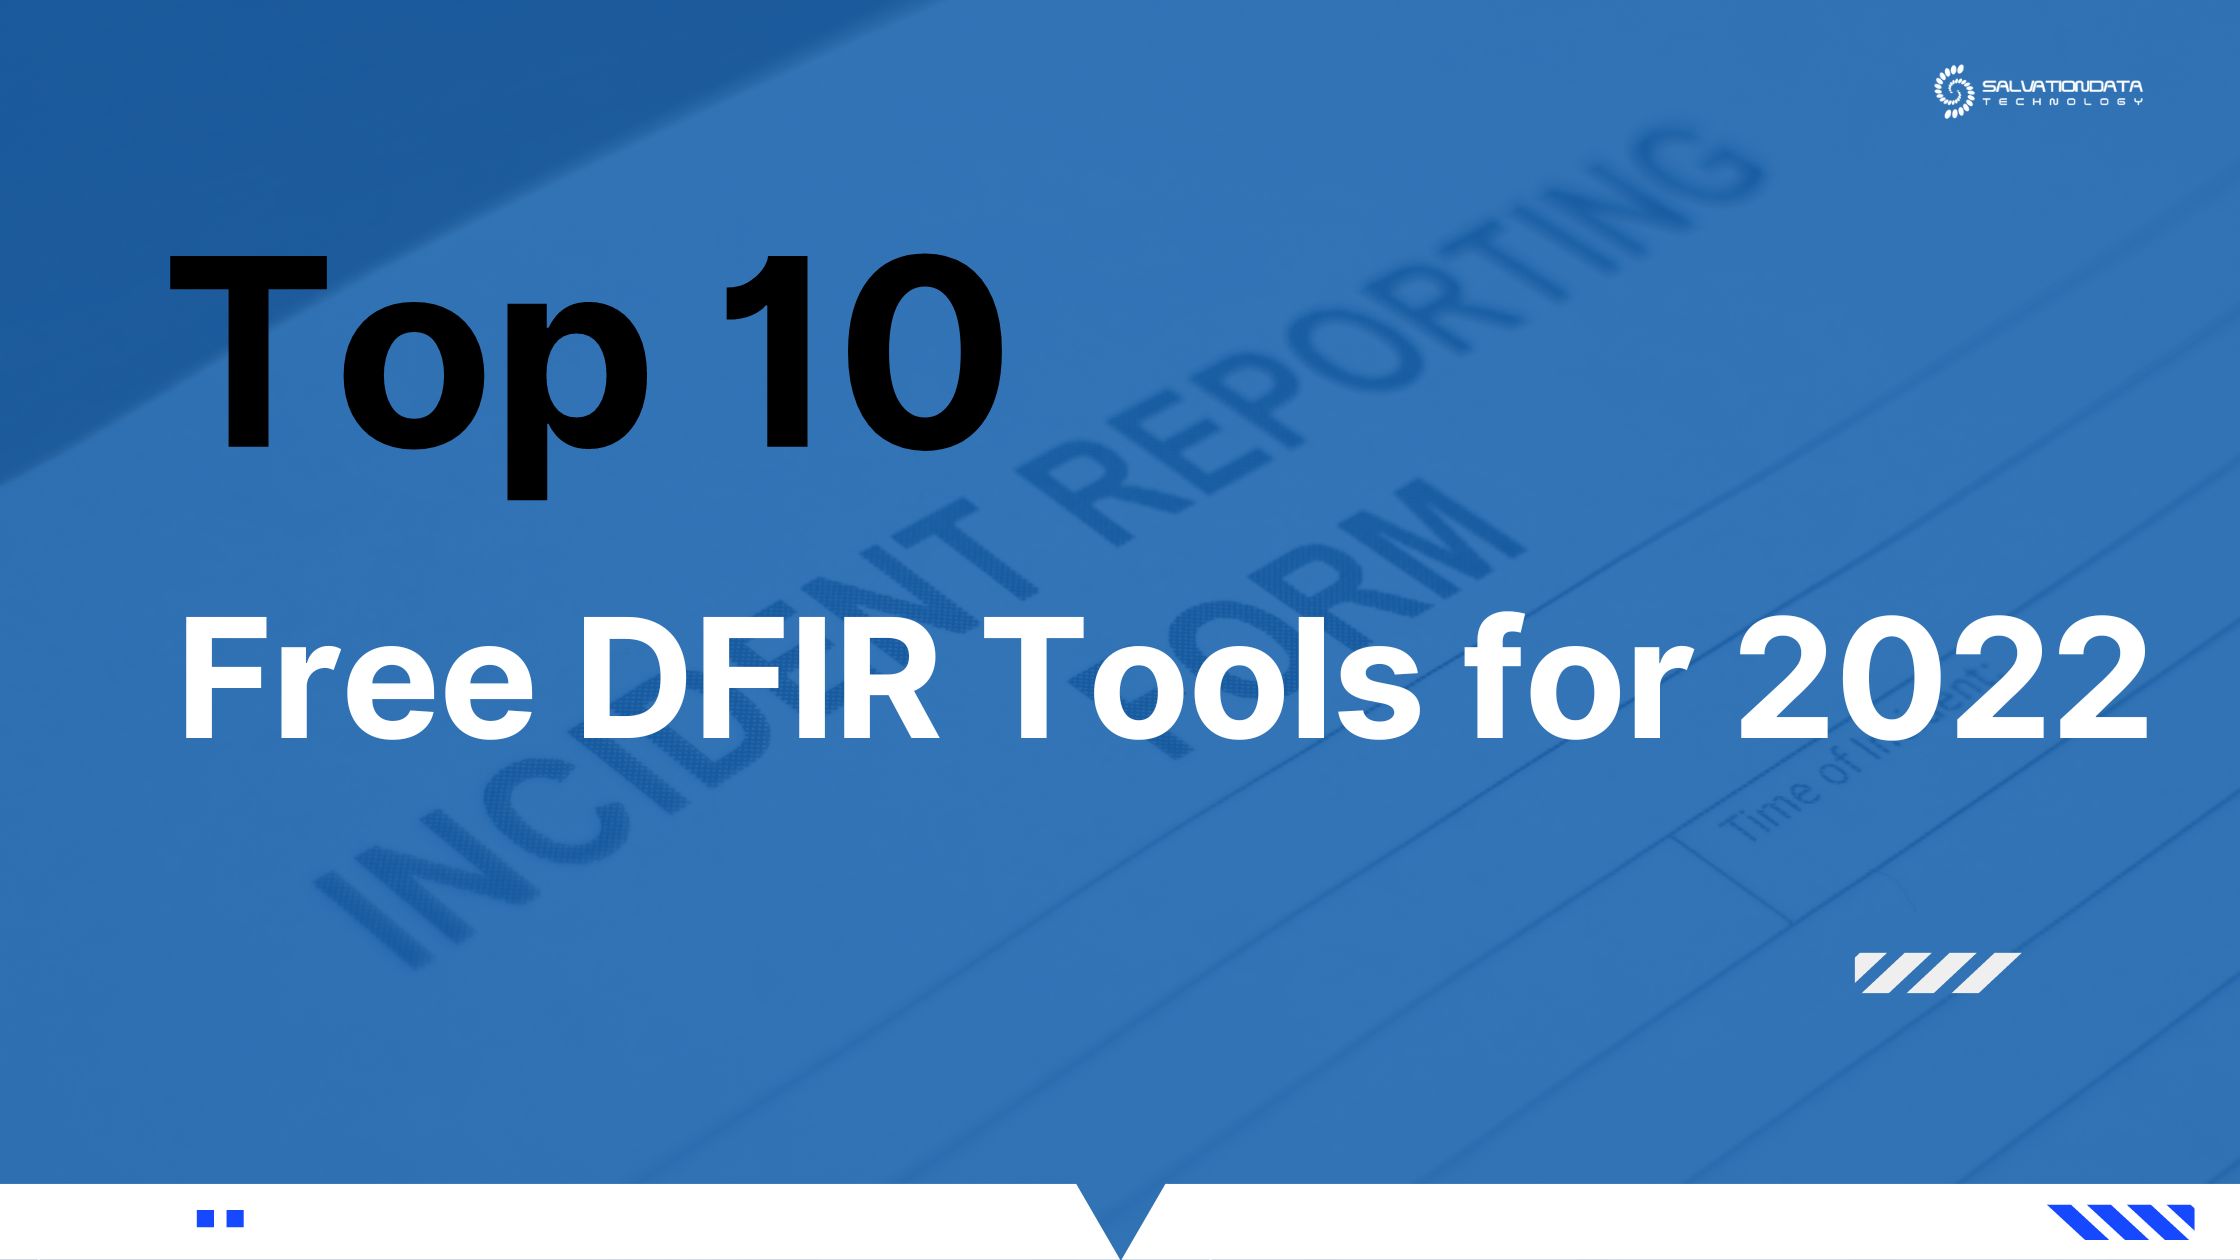 Top 10 Free DFIR Tools for 2022